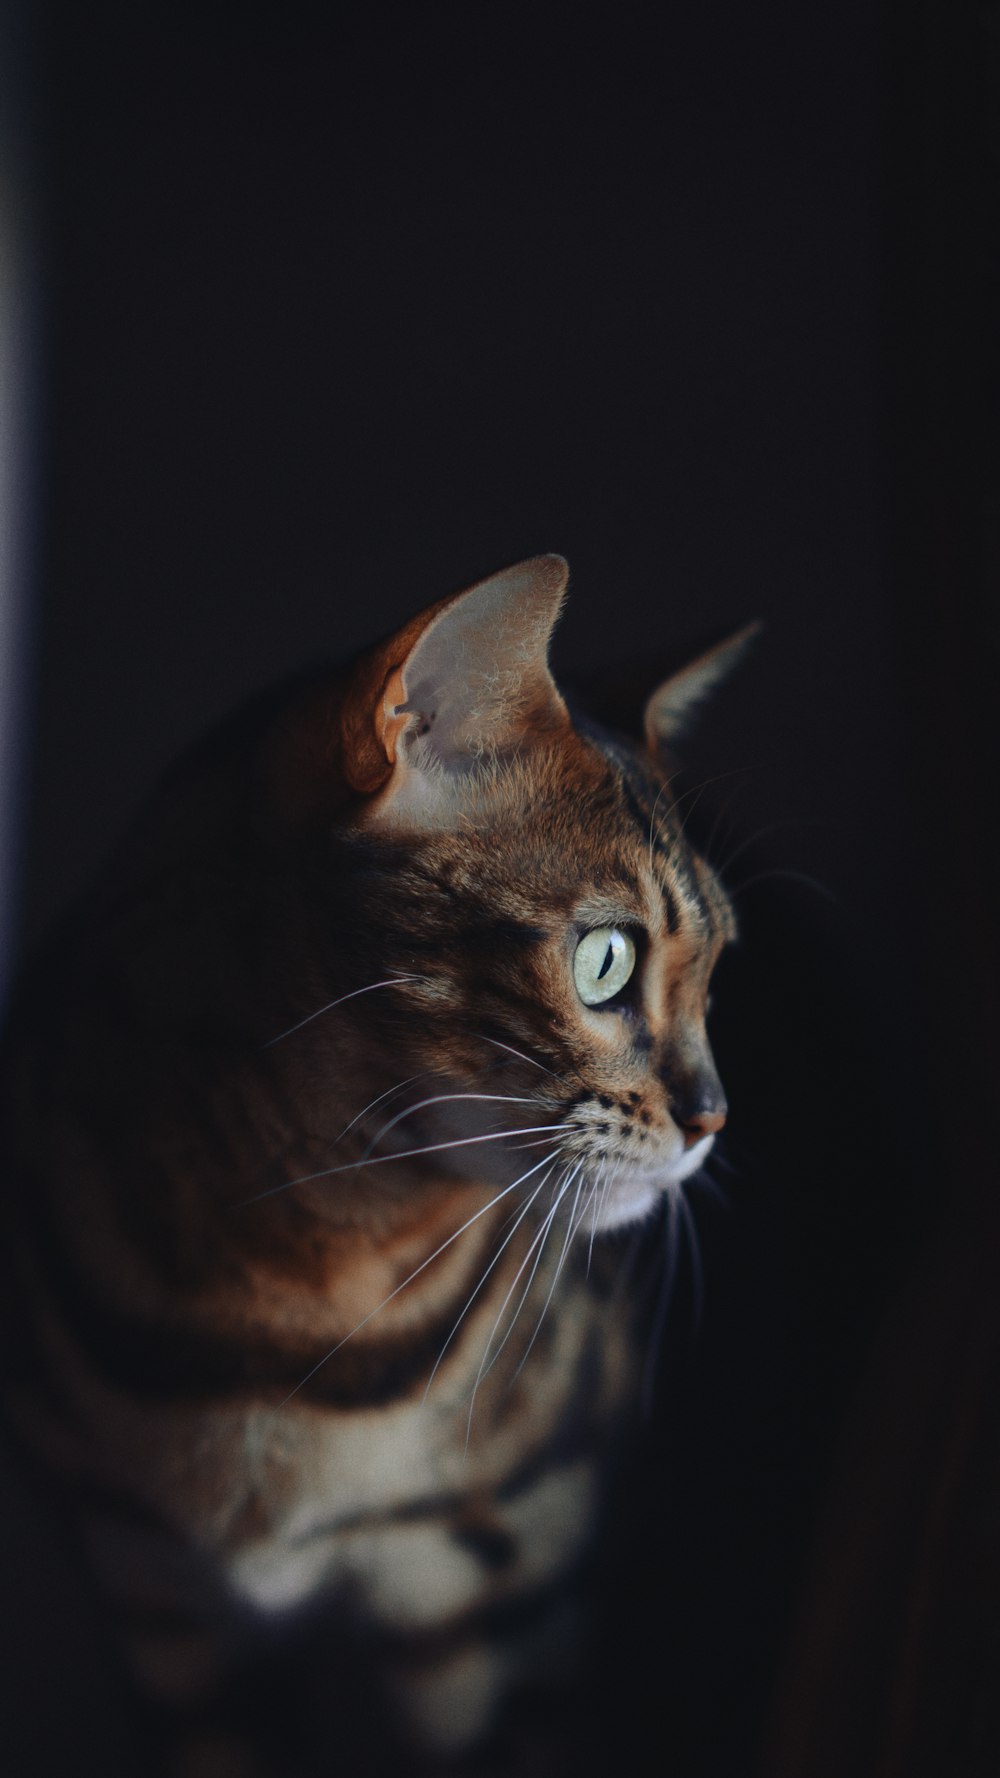 a cat sitting in the dark looking at something